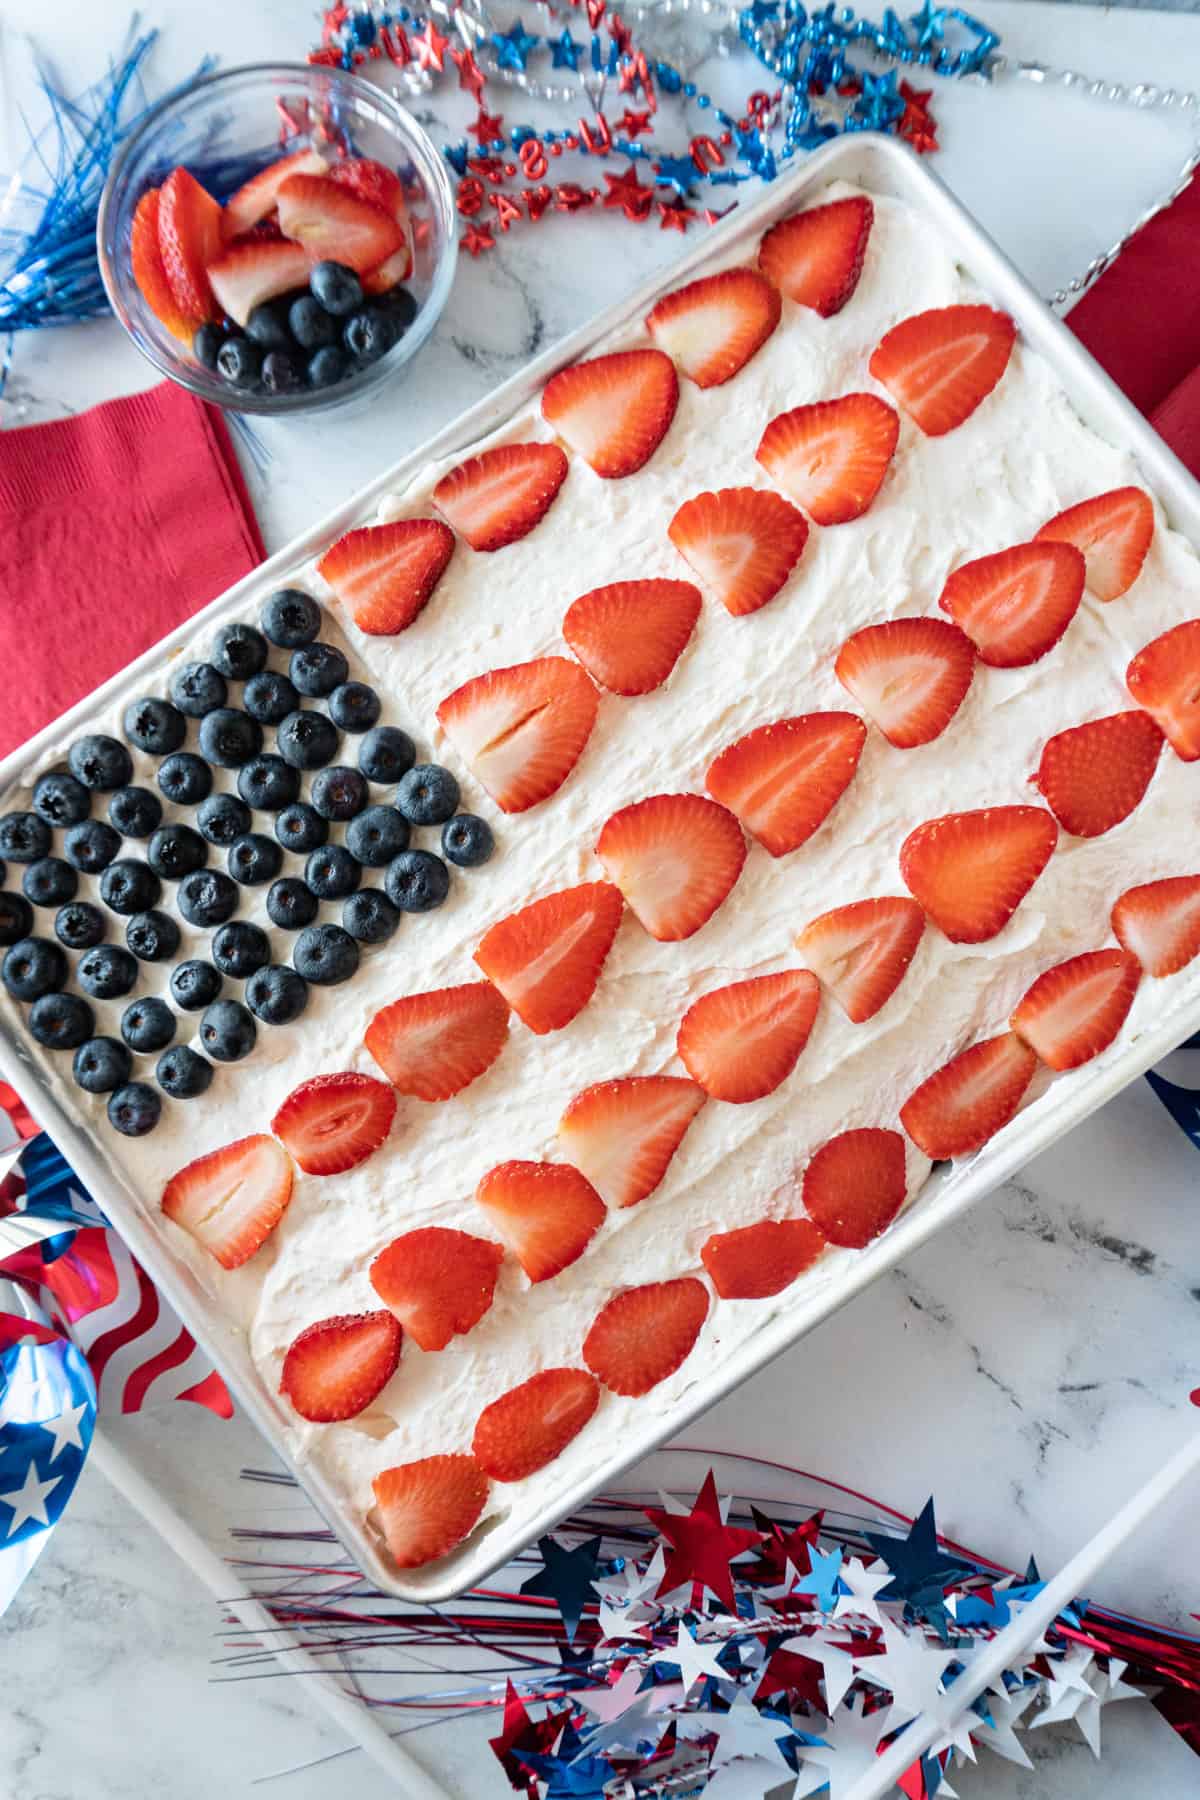 Flag cake surrounded by 4th of July decorations